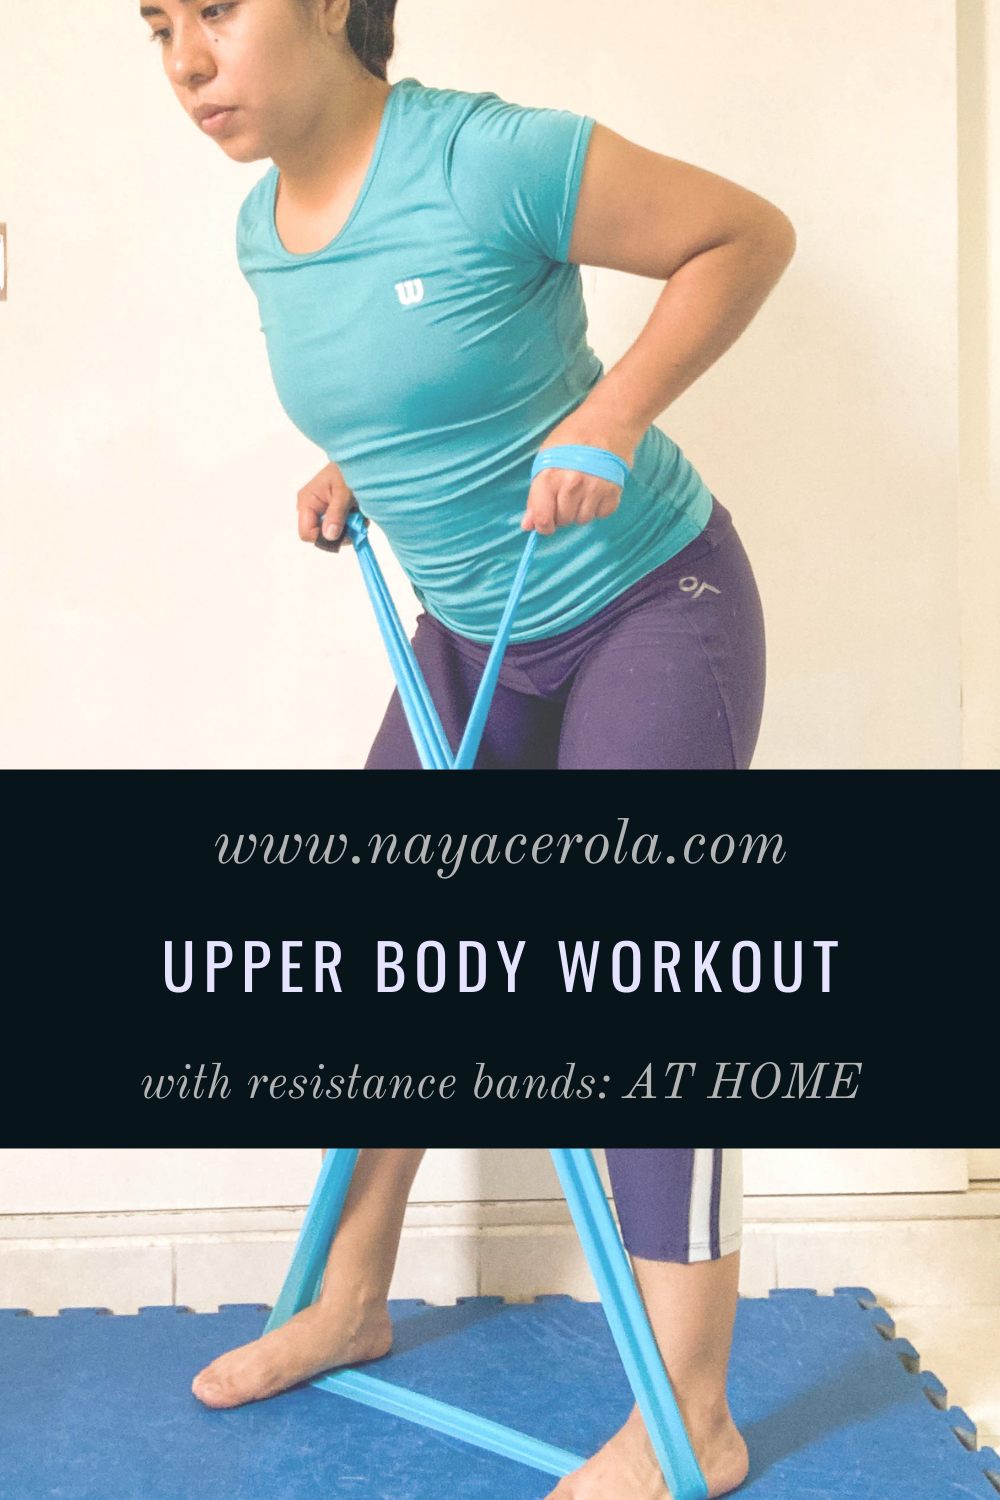 Upper Body Workout At home With Recovery Bands ~ NayAcerola